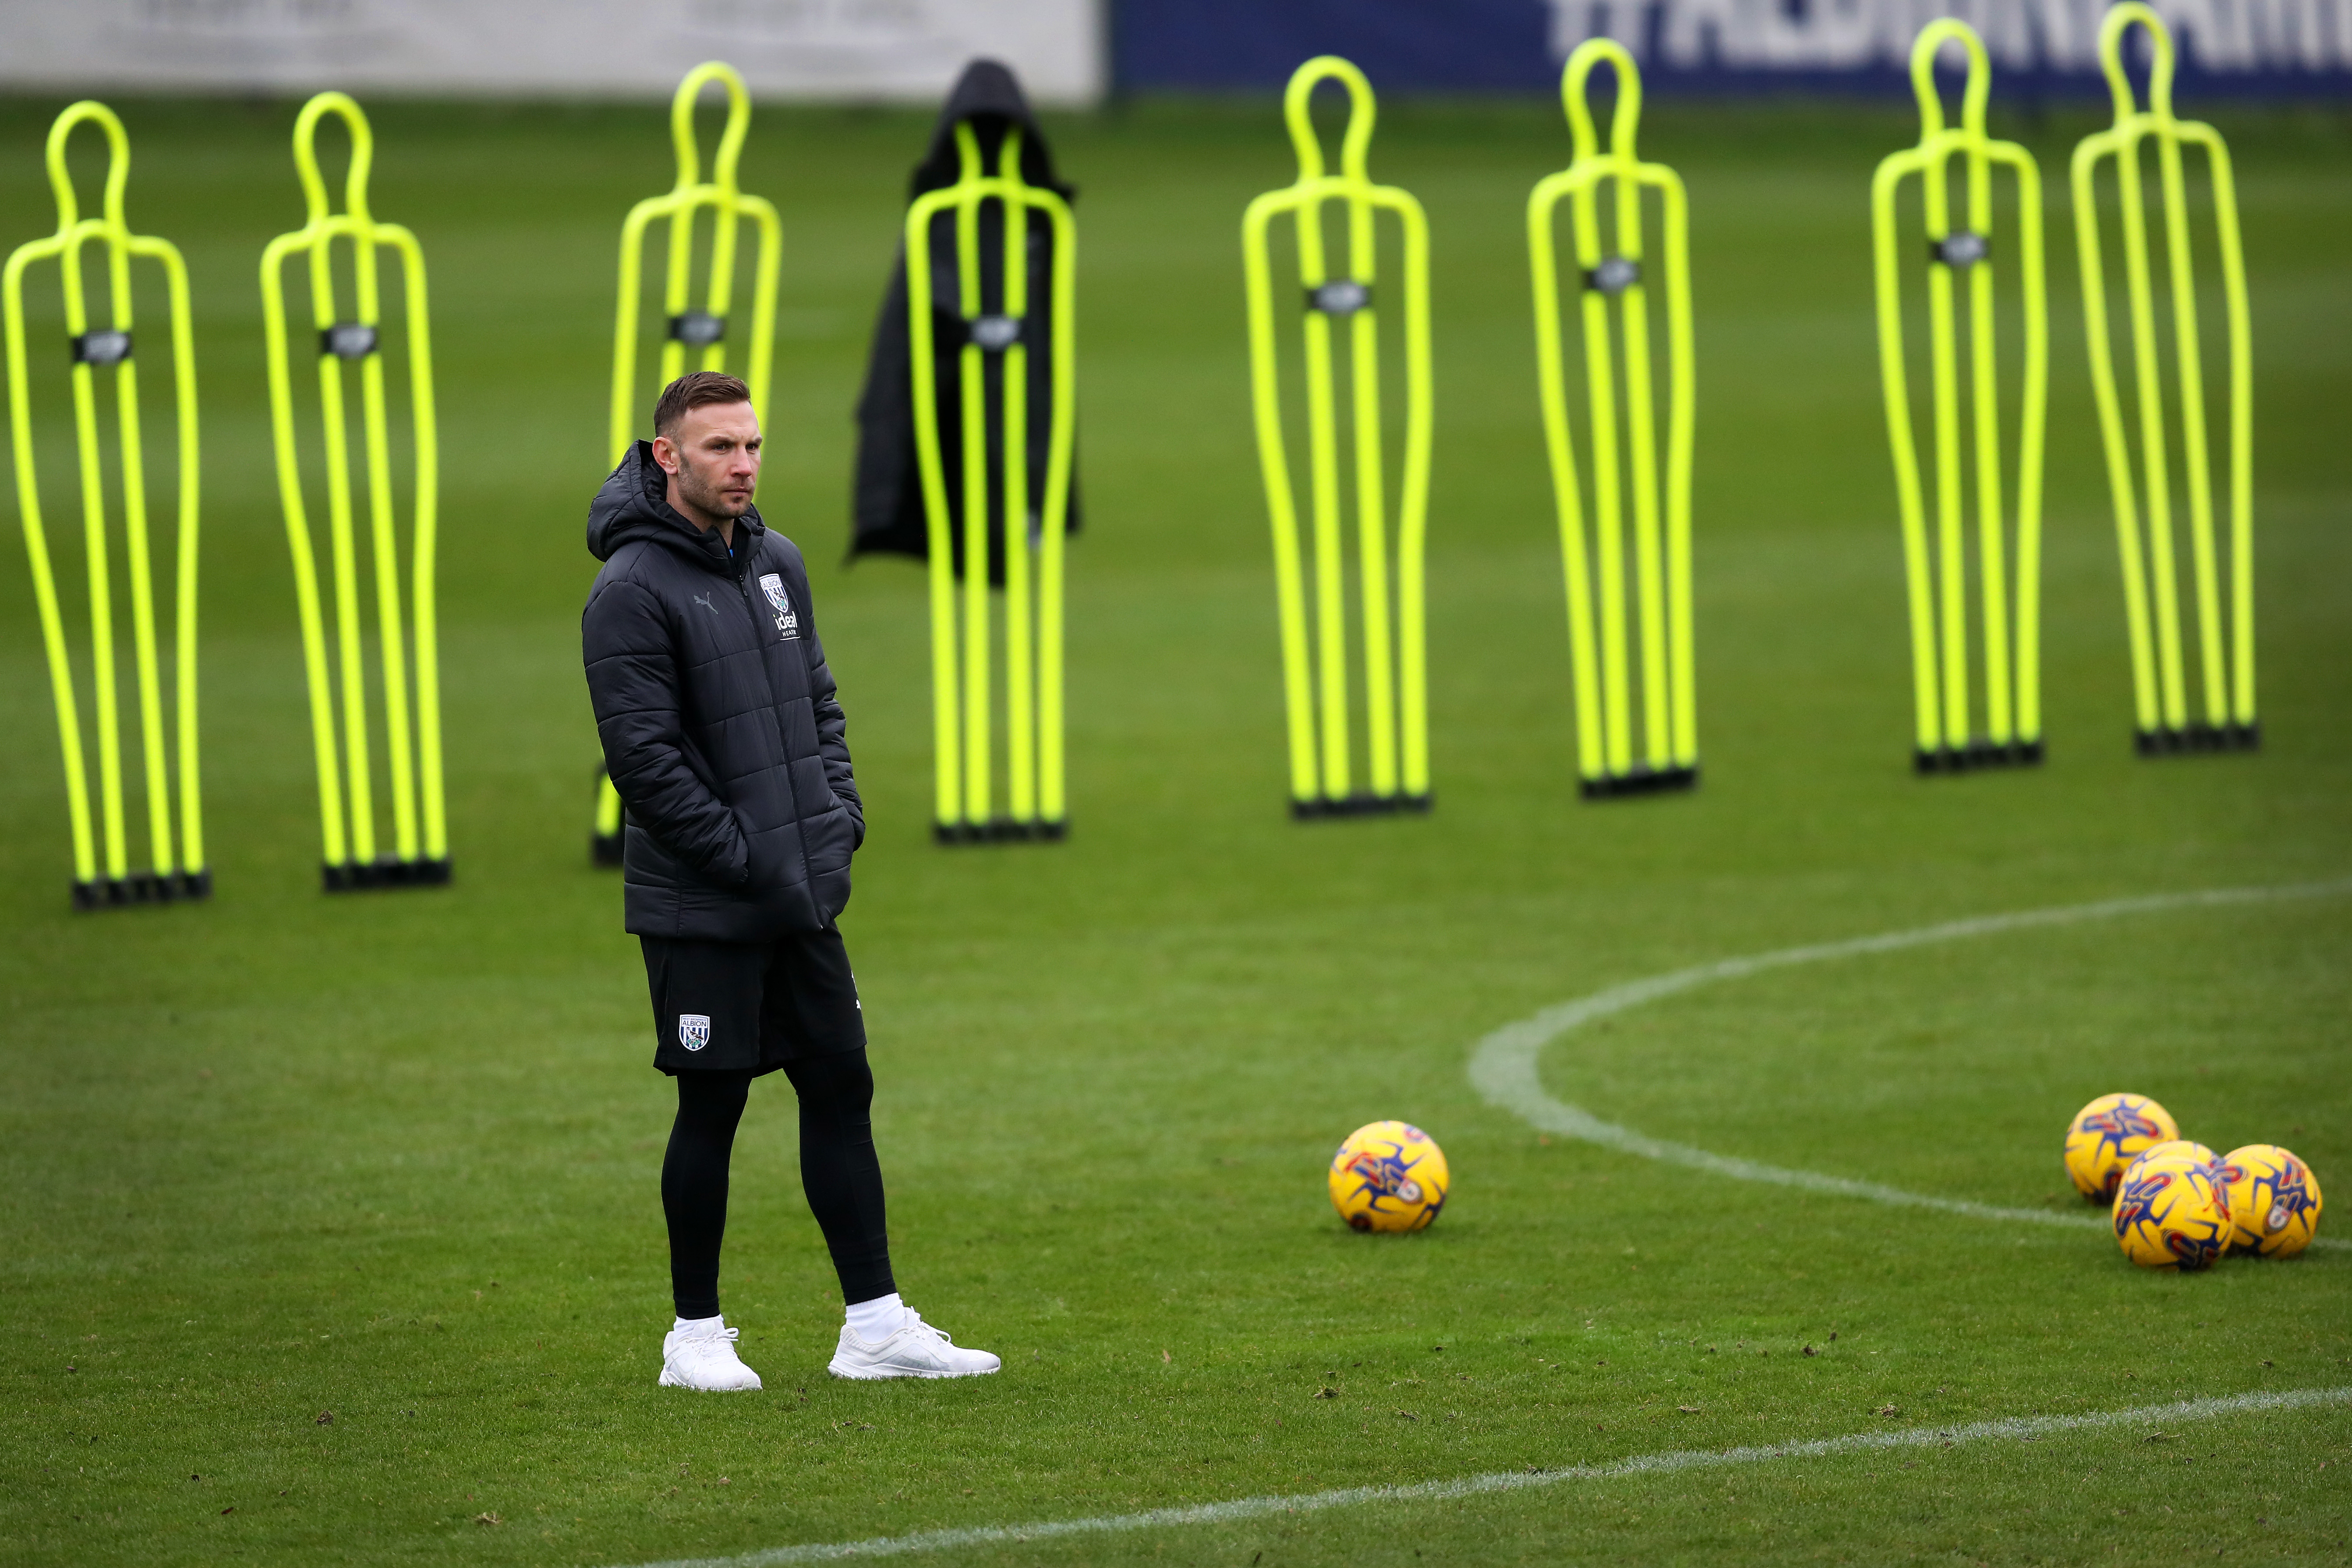 Andi Weimann stood out on the training pitch surrounded by footballs and mannequins 